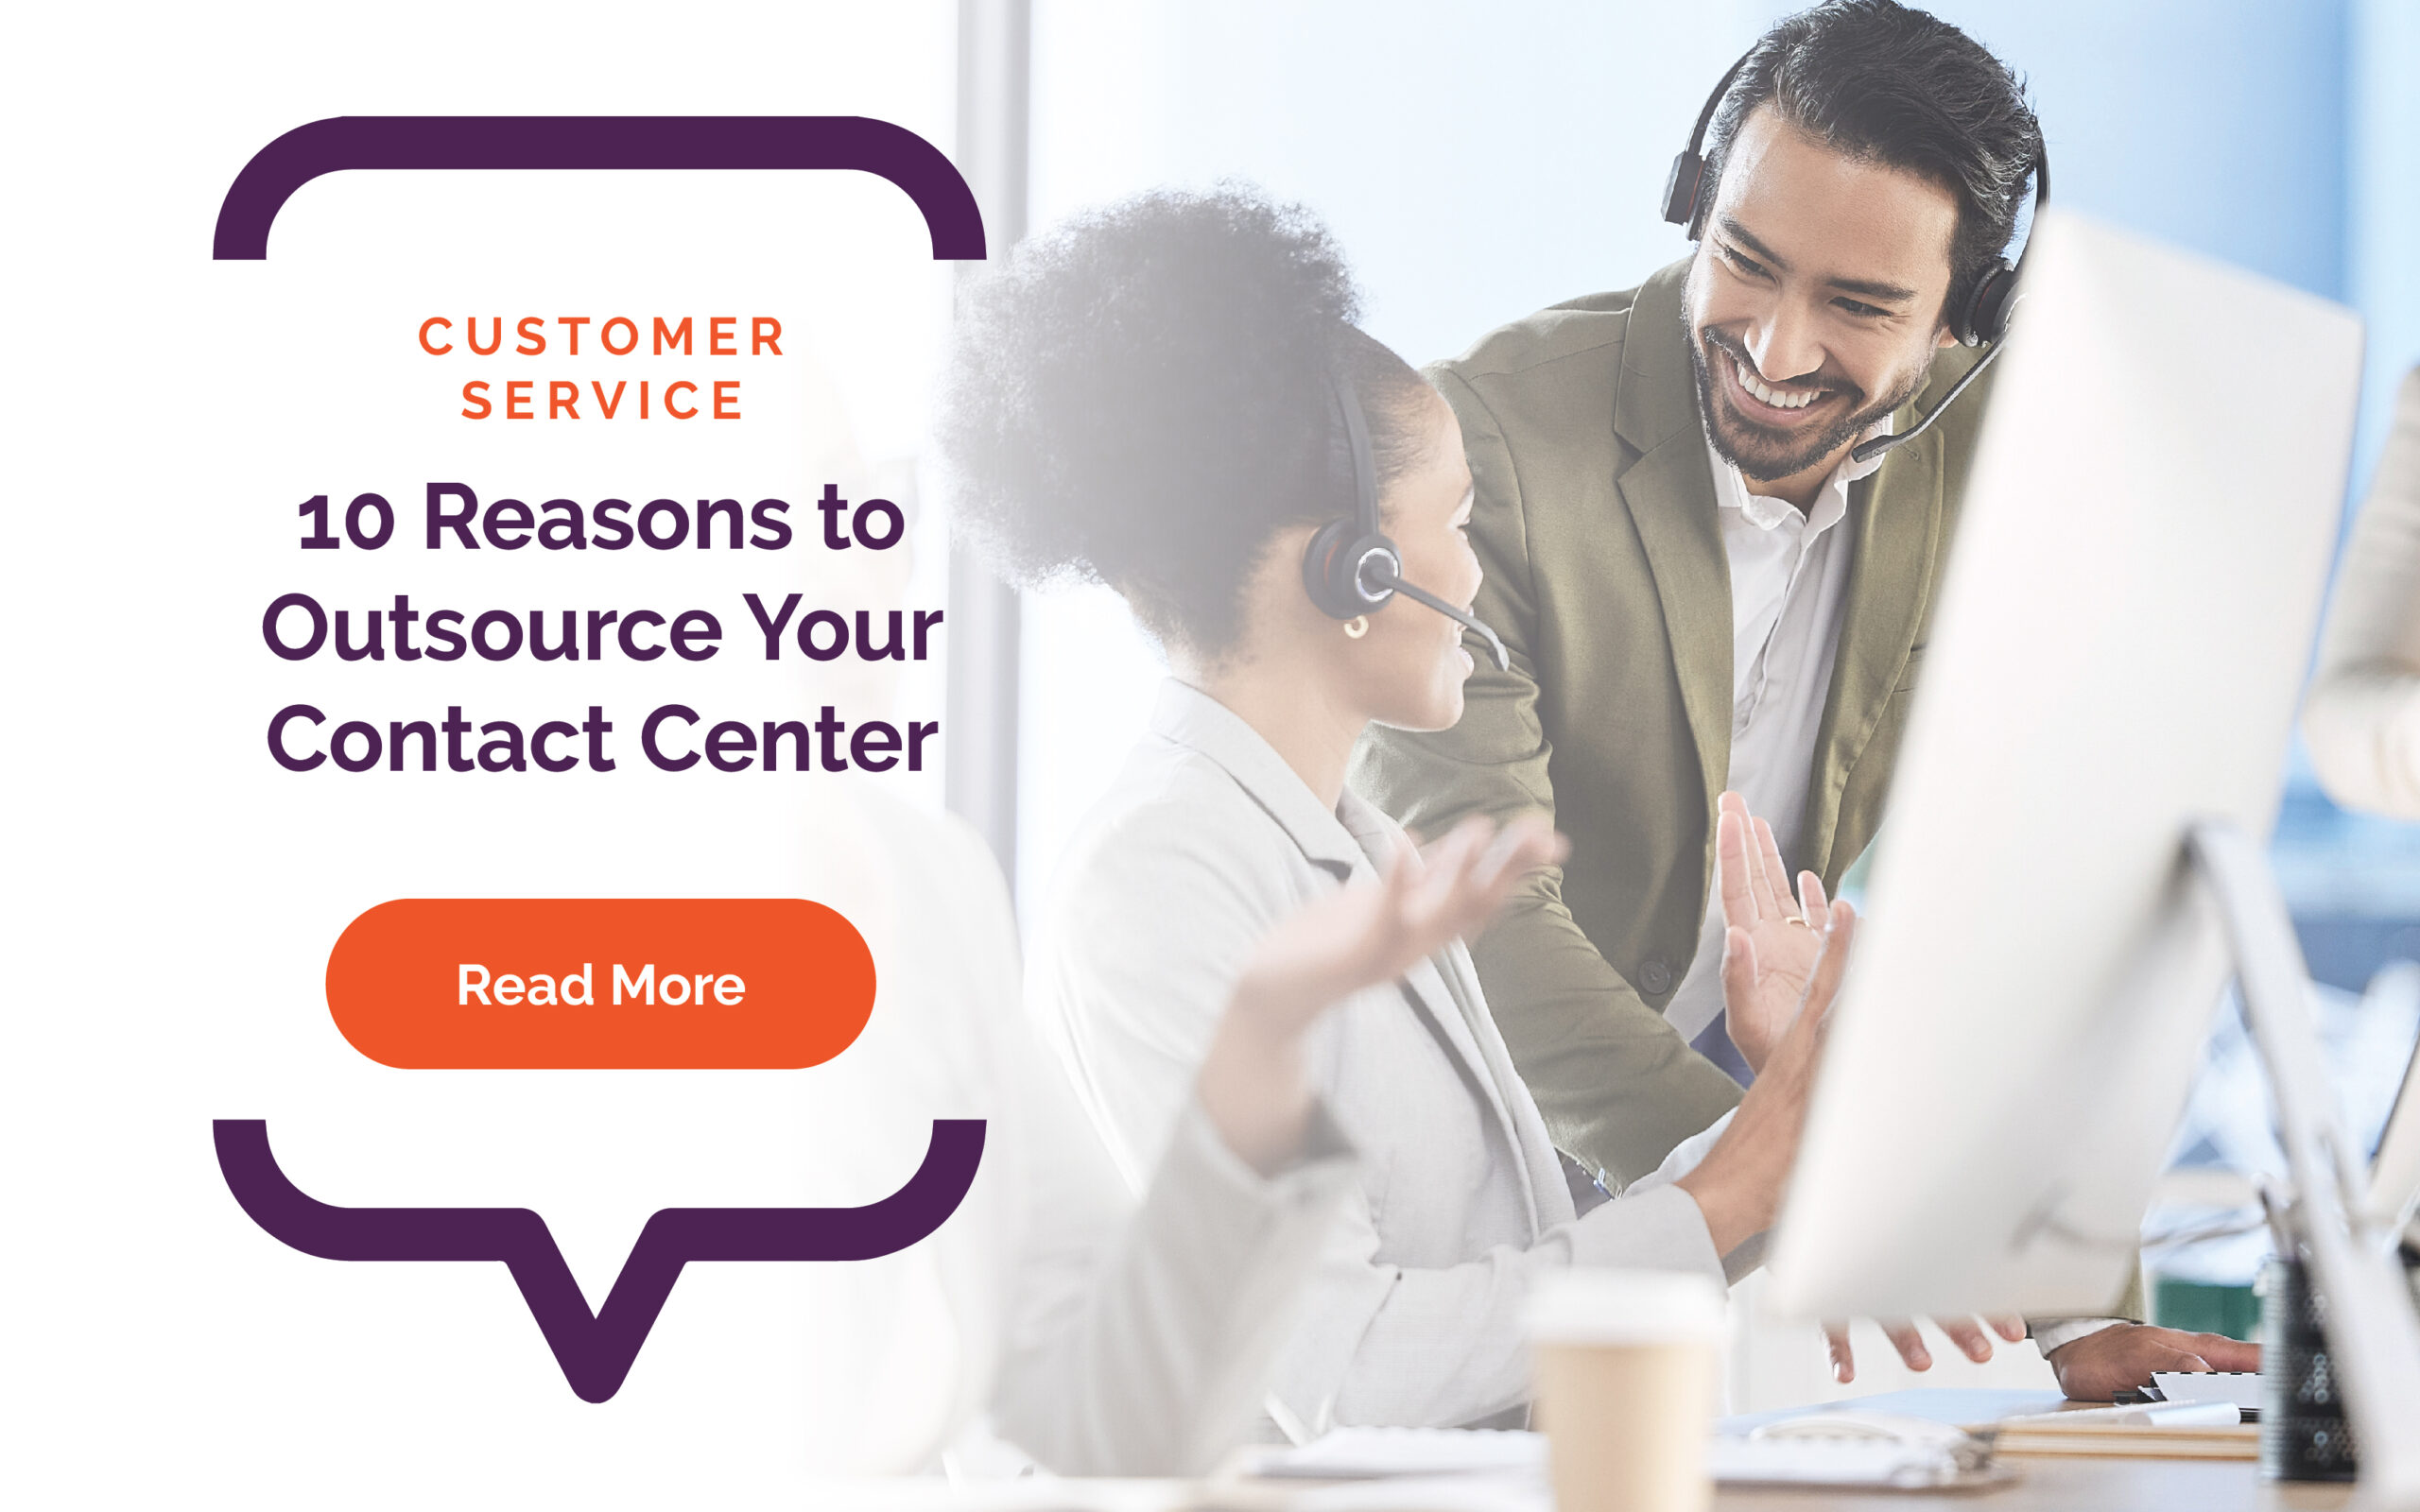 If you’re considering outsourcing your contact center, discover the reasons why it might make sense for your business in AdviseCX’s blog.